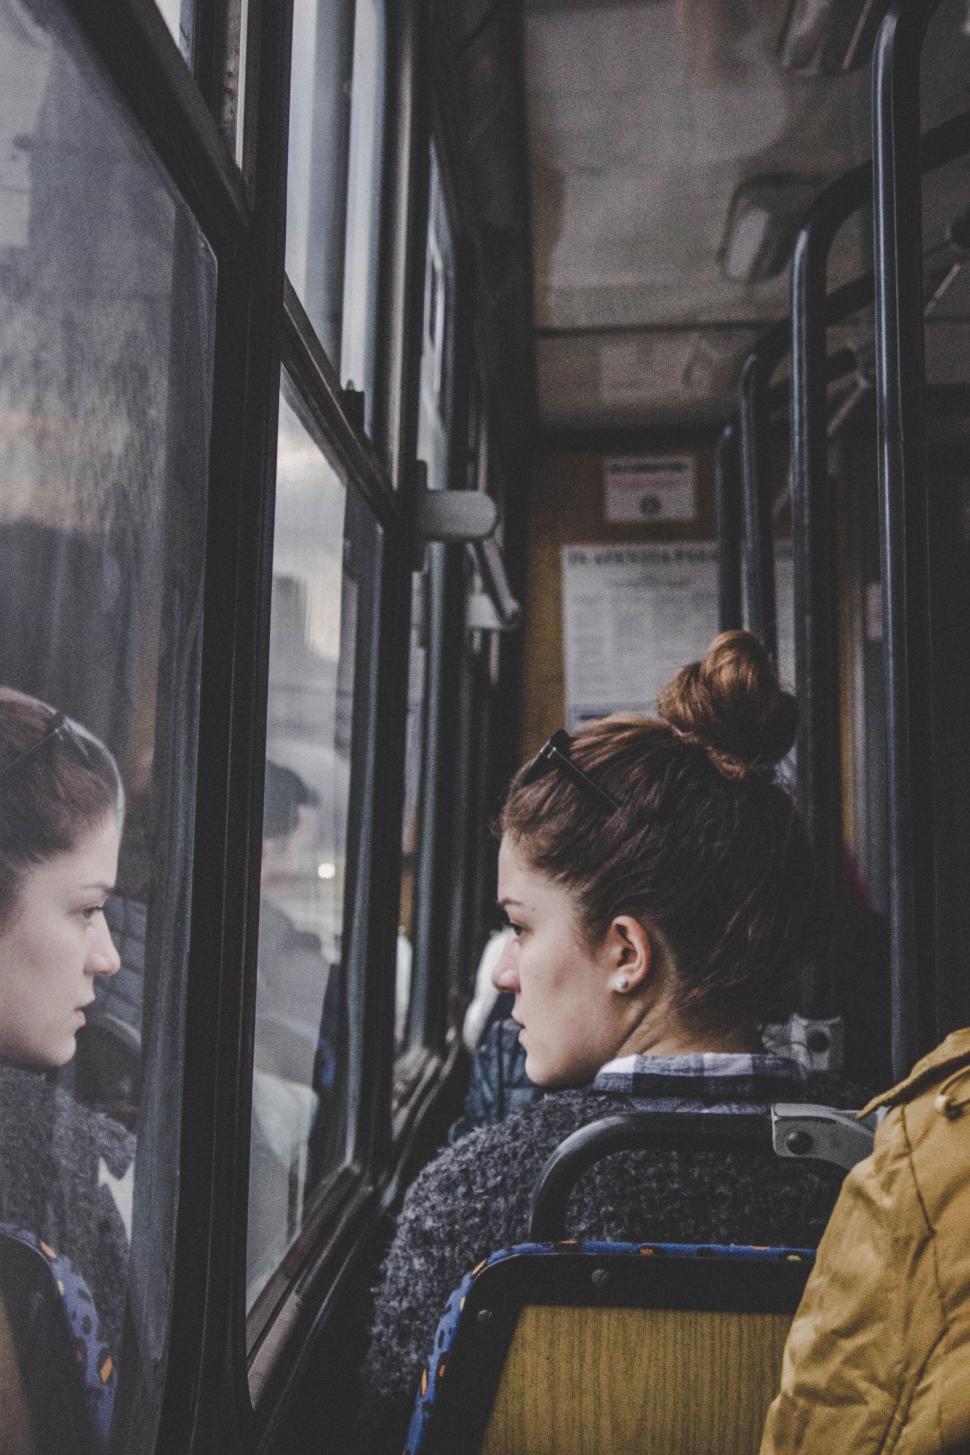 Free Image of Two Women Sitting on a Bus Looking Out the Window 